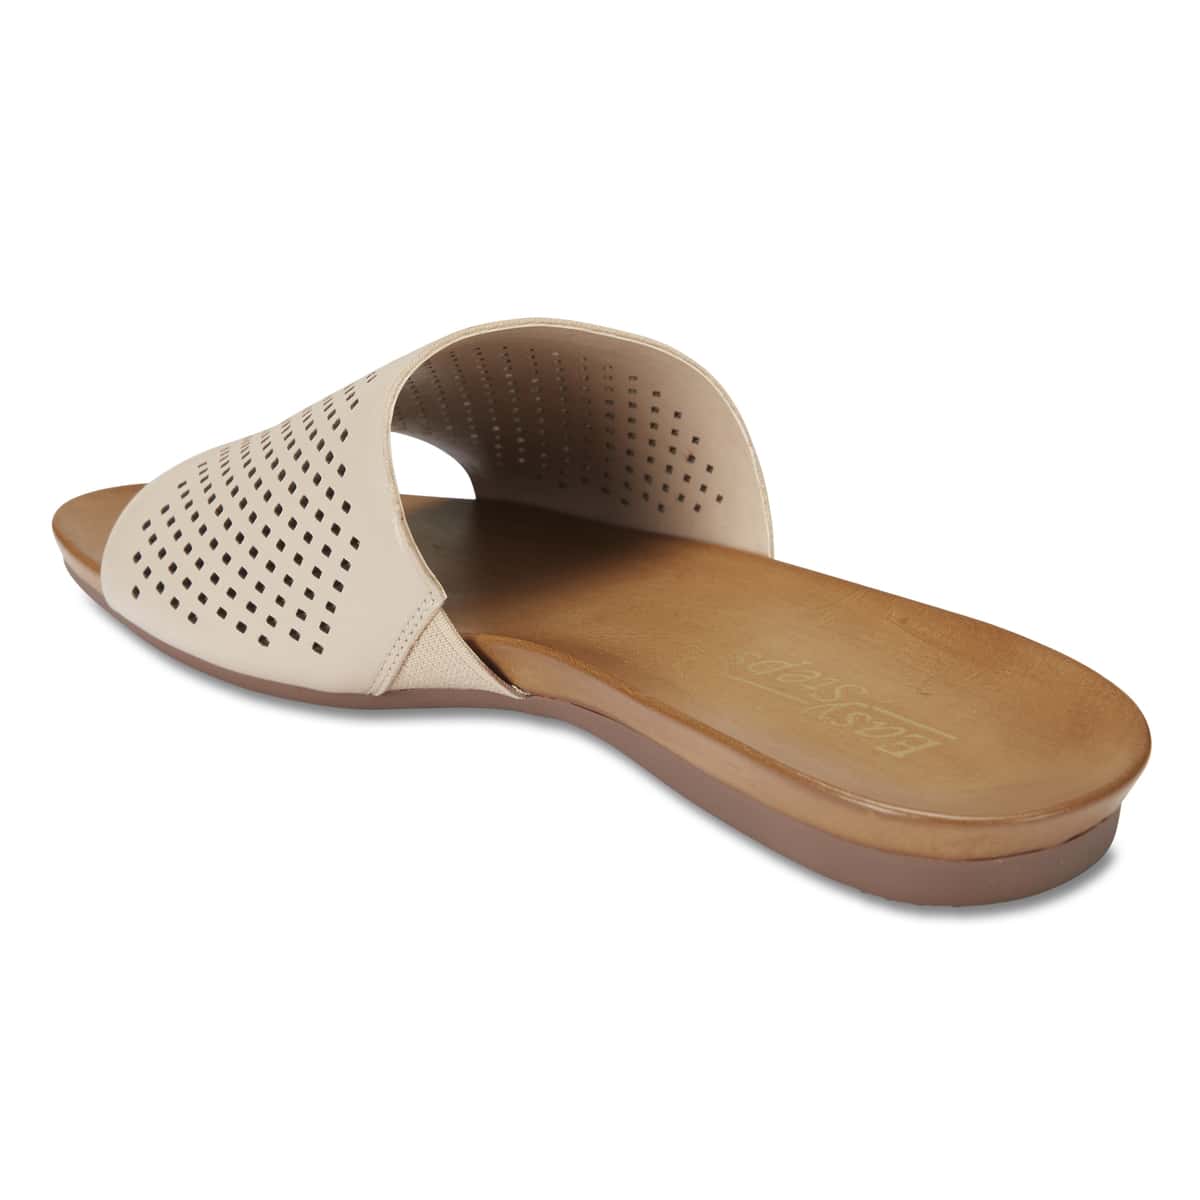 Aztec Slide in Nude Leather